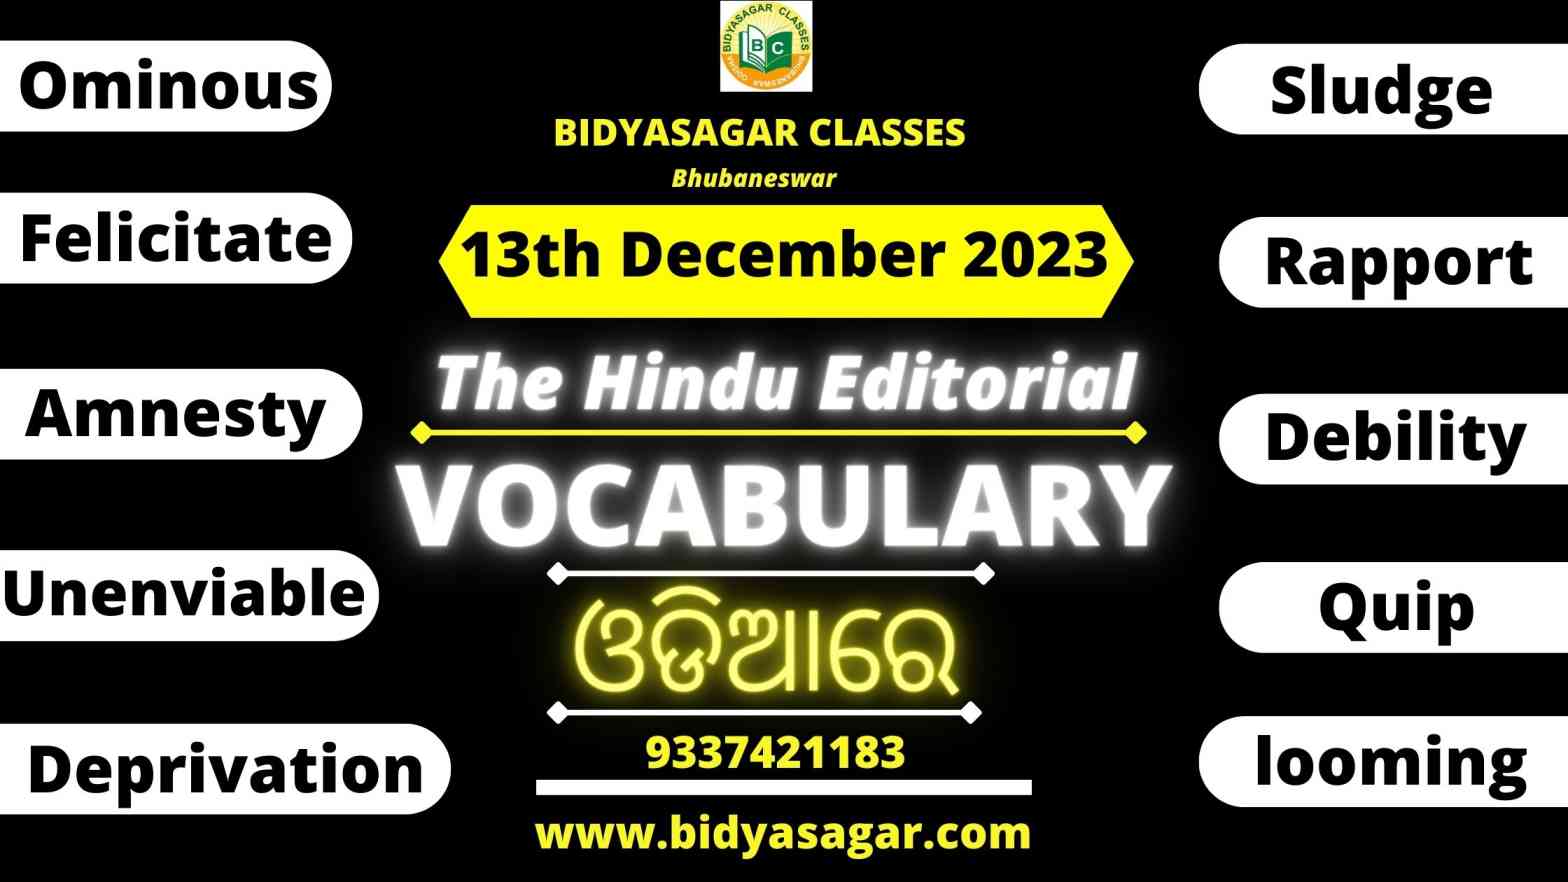 The Hindu Editorial Vocabulary of 13th December 2023